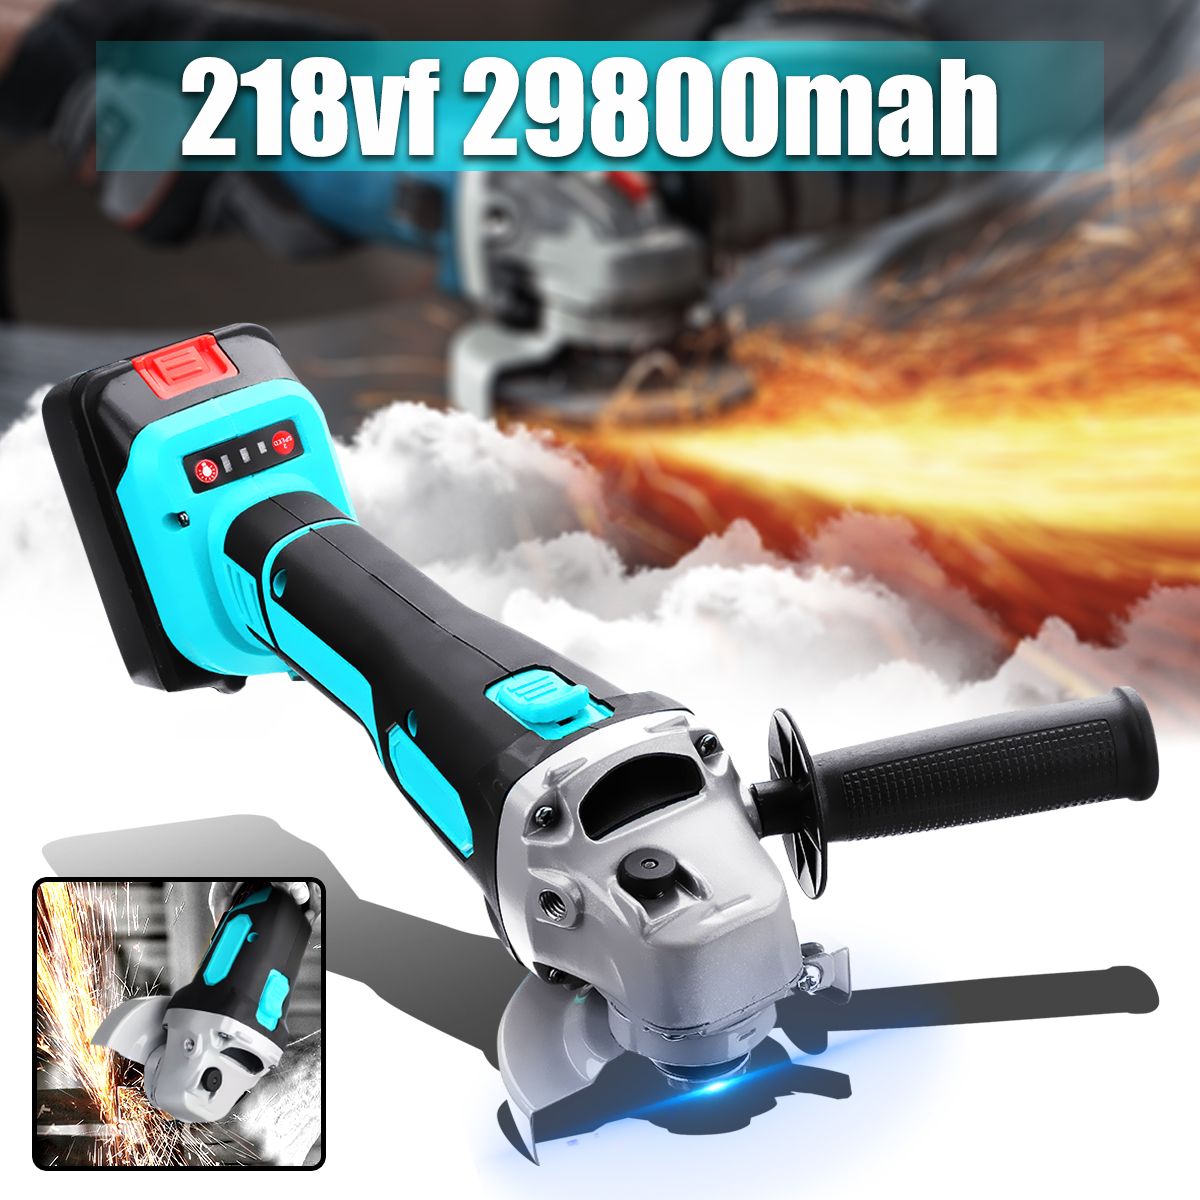 Lithium-Battery-Electric-Angle-Grinder-Electric-Grinding-Machine-Cordless-Polishing-Machine-Cutting--1431285